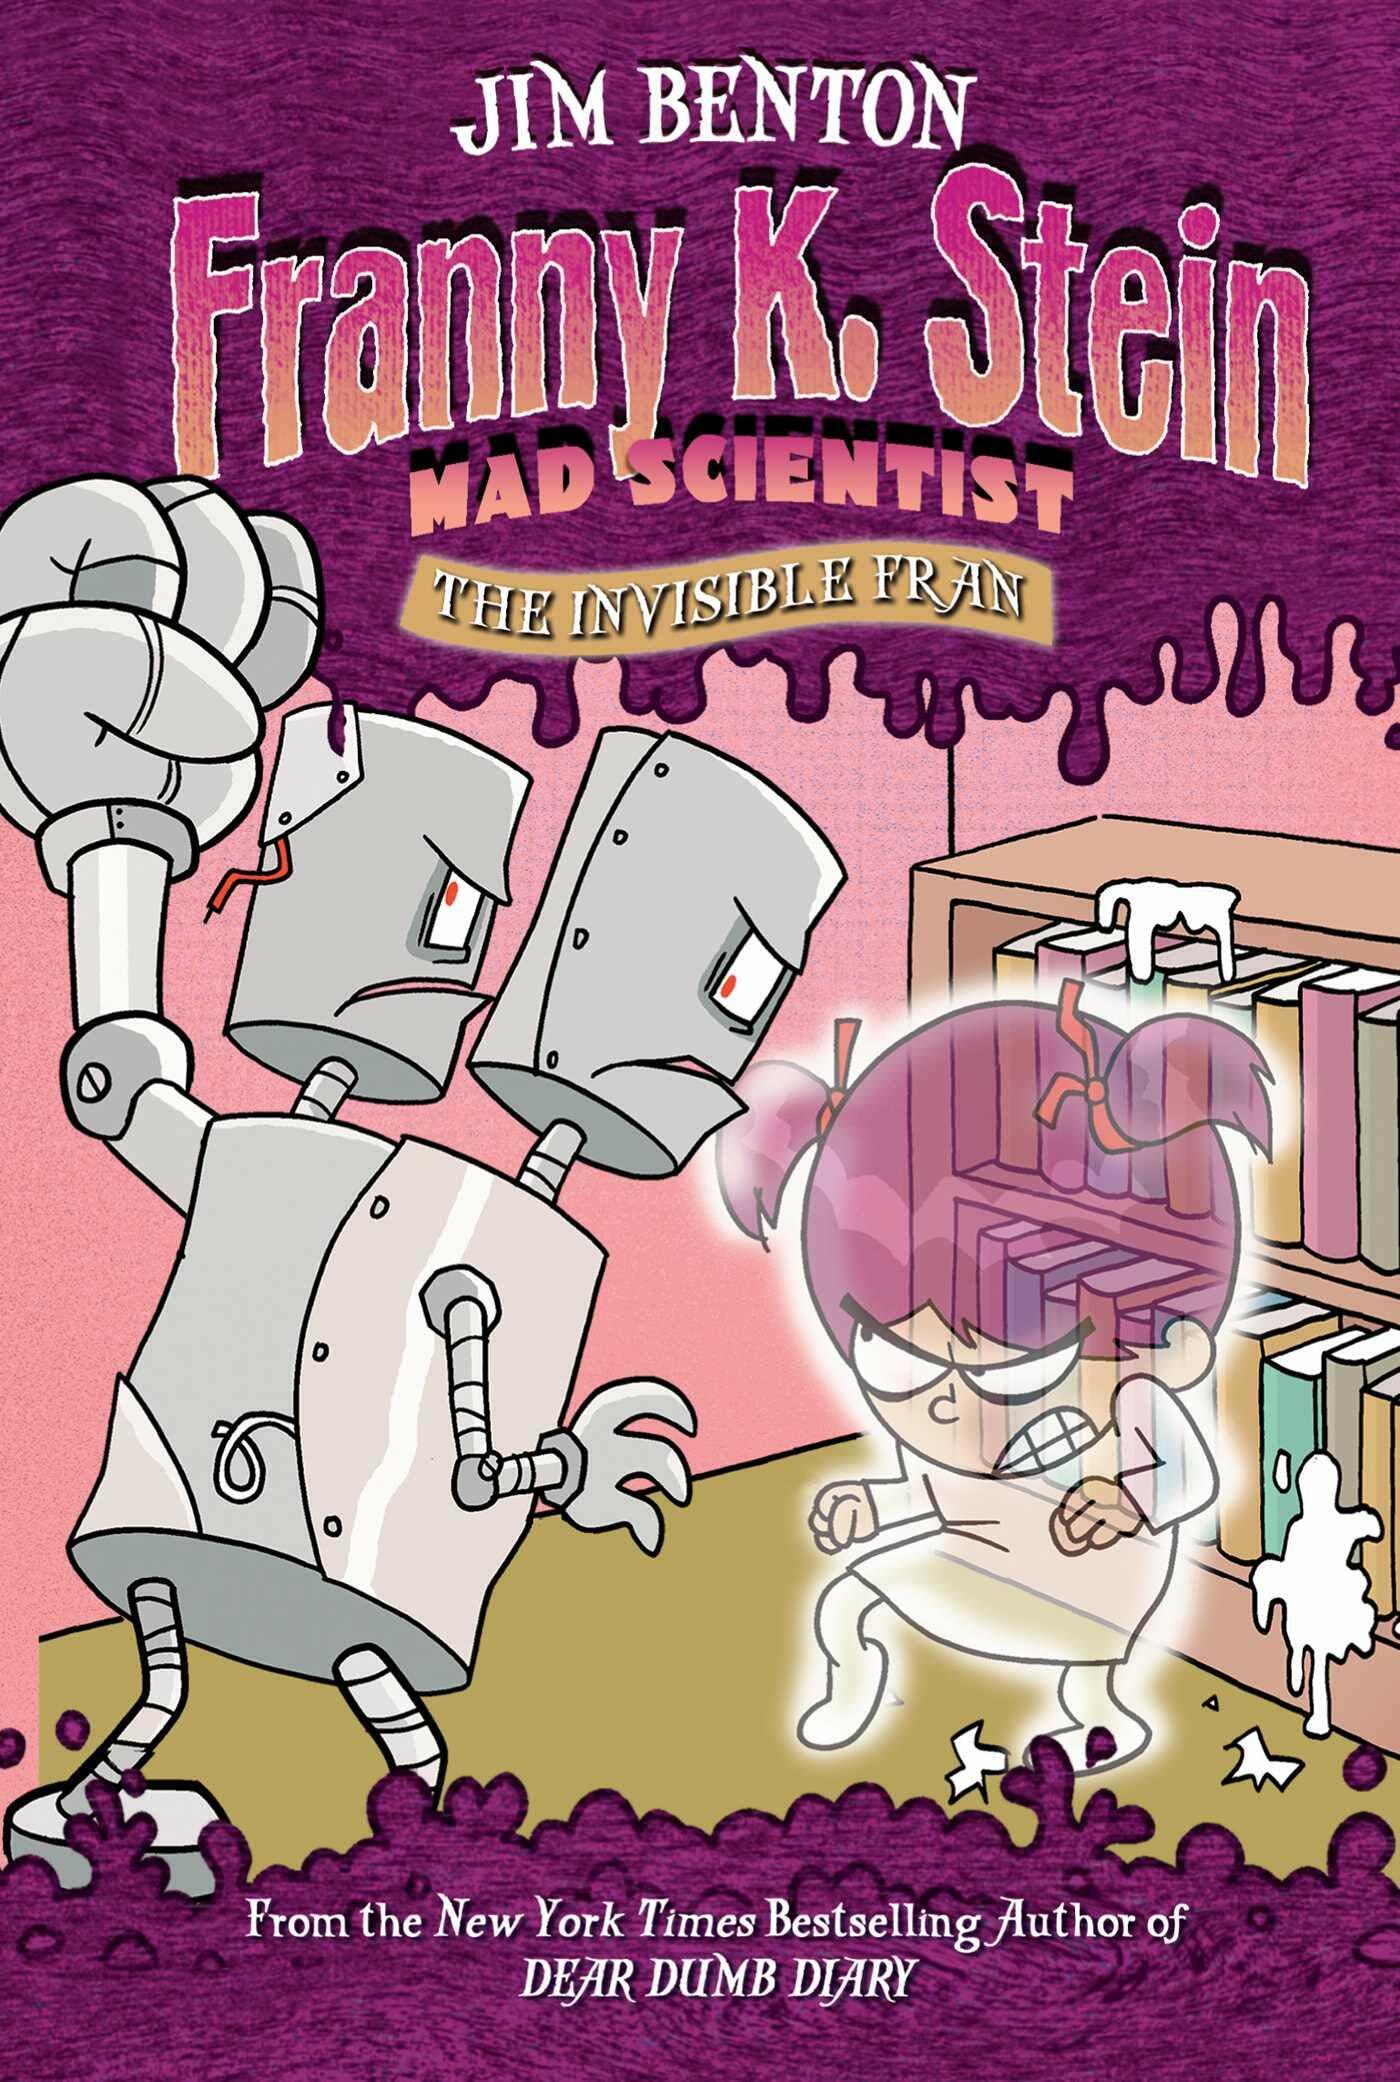 Franny K. Stein Mad Scientist #3 : The Invisible Fran (Paperback)